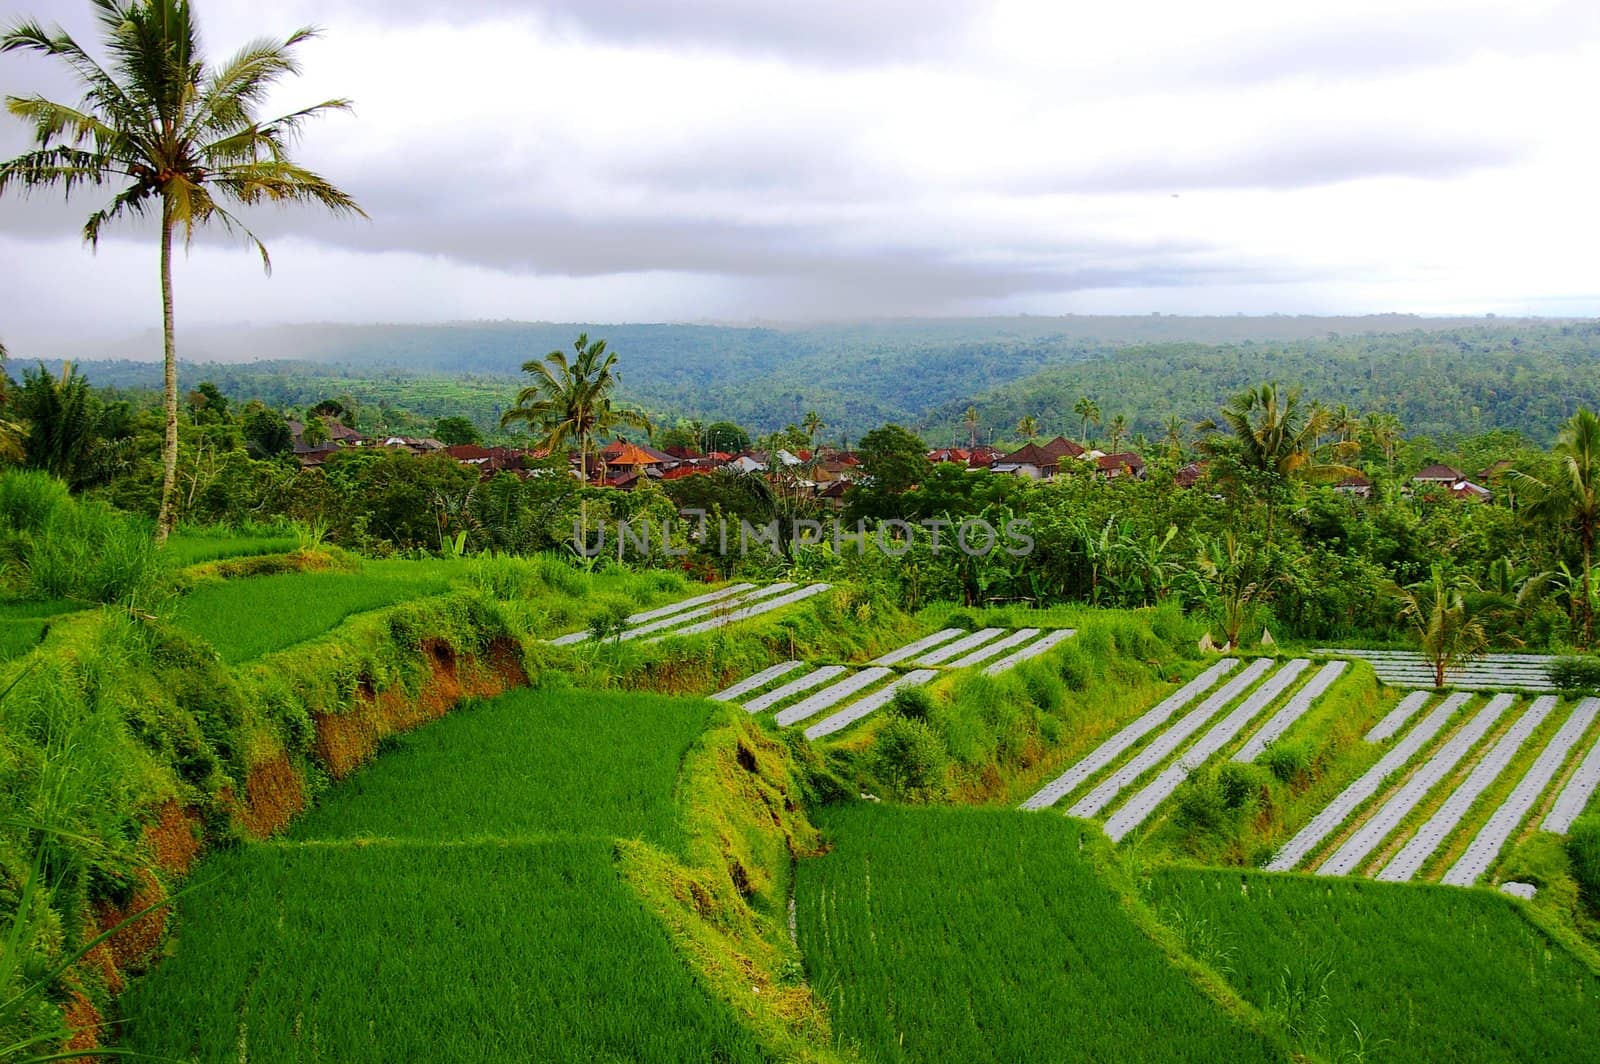 Rice fields close to the village of Pelaga. This scenic area is fast becoming a new tourist destination in Bali. Located on the Northern tip of Badung regency, about 48 km North of the capital of Bali, Denpasar.